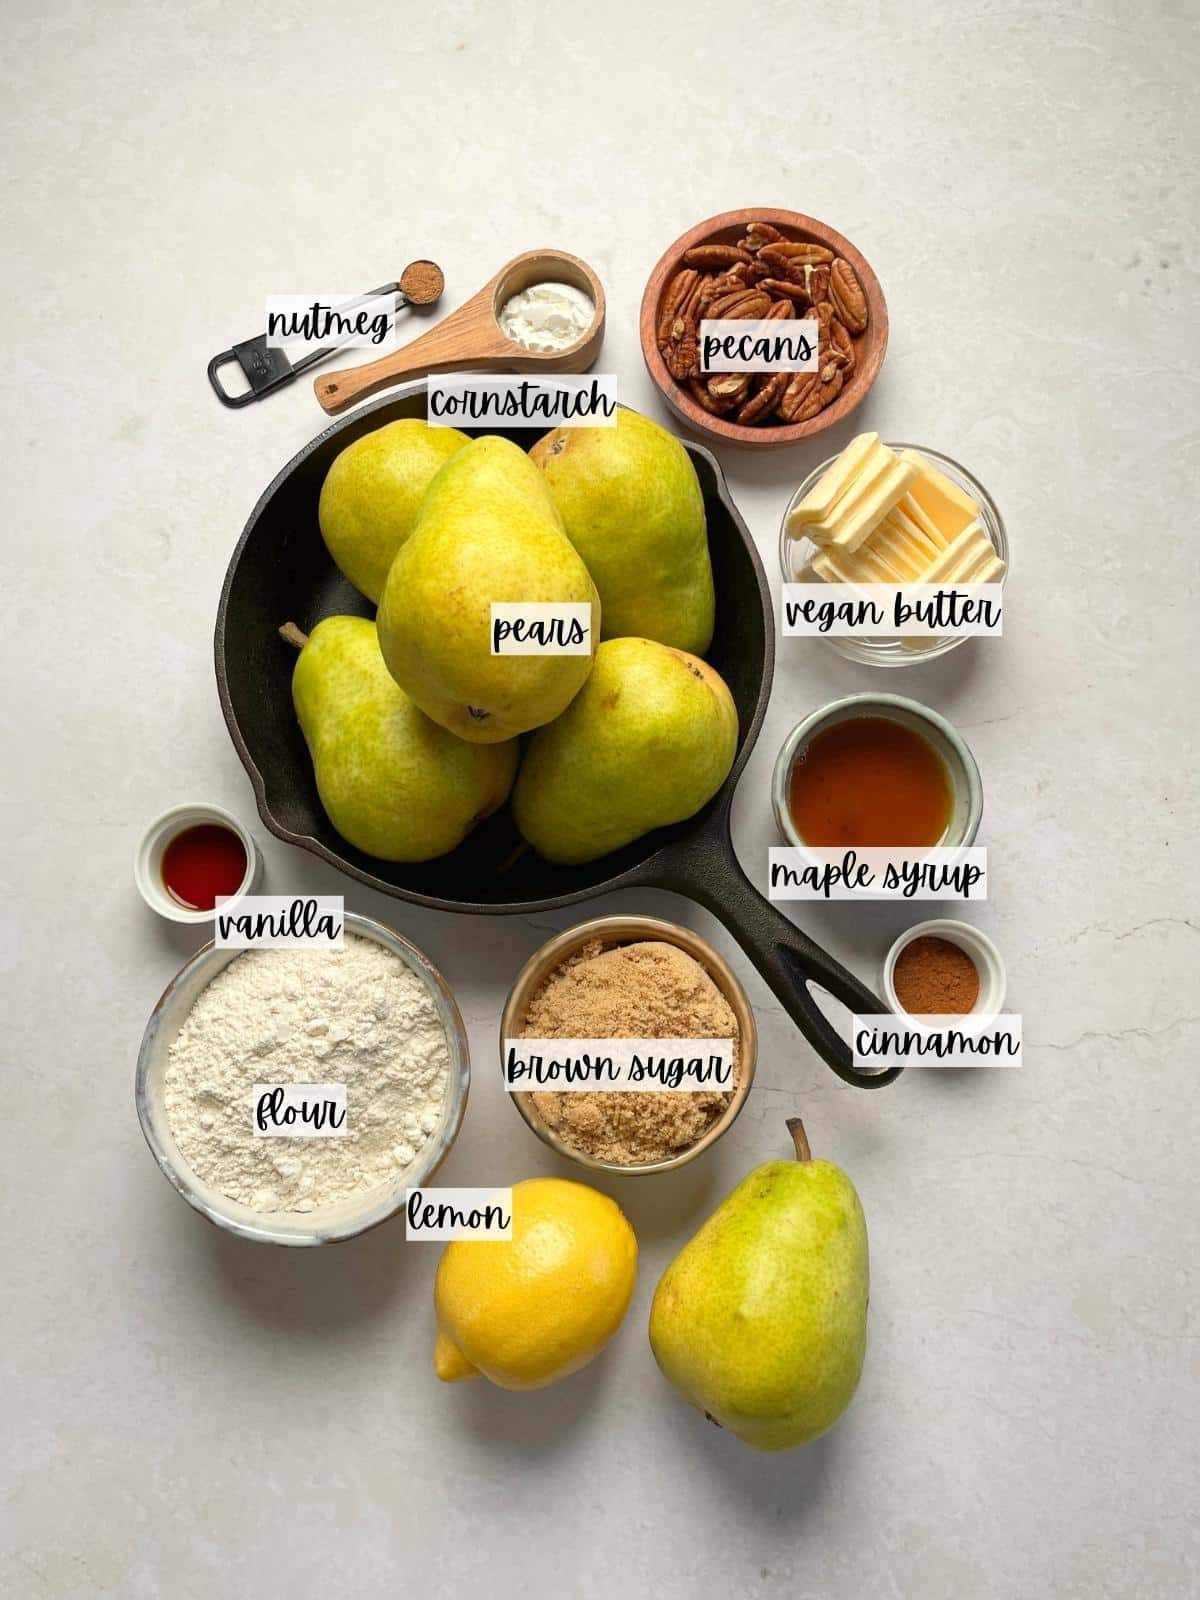 Labeled ingredients for the pear crisp.